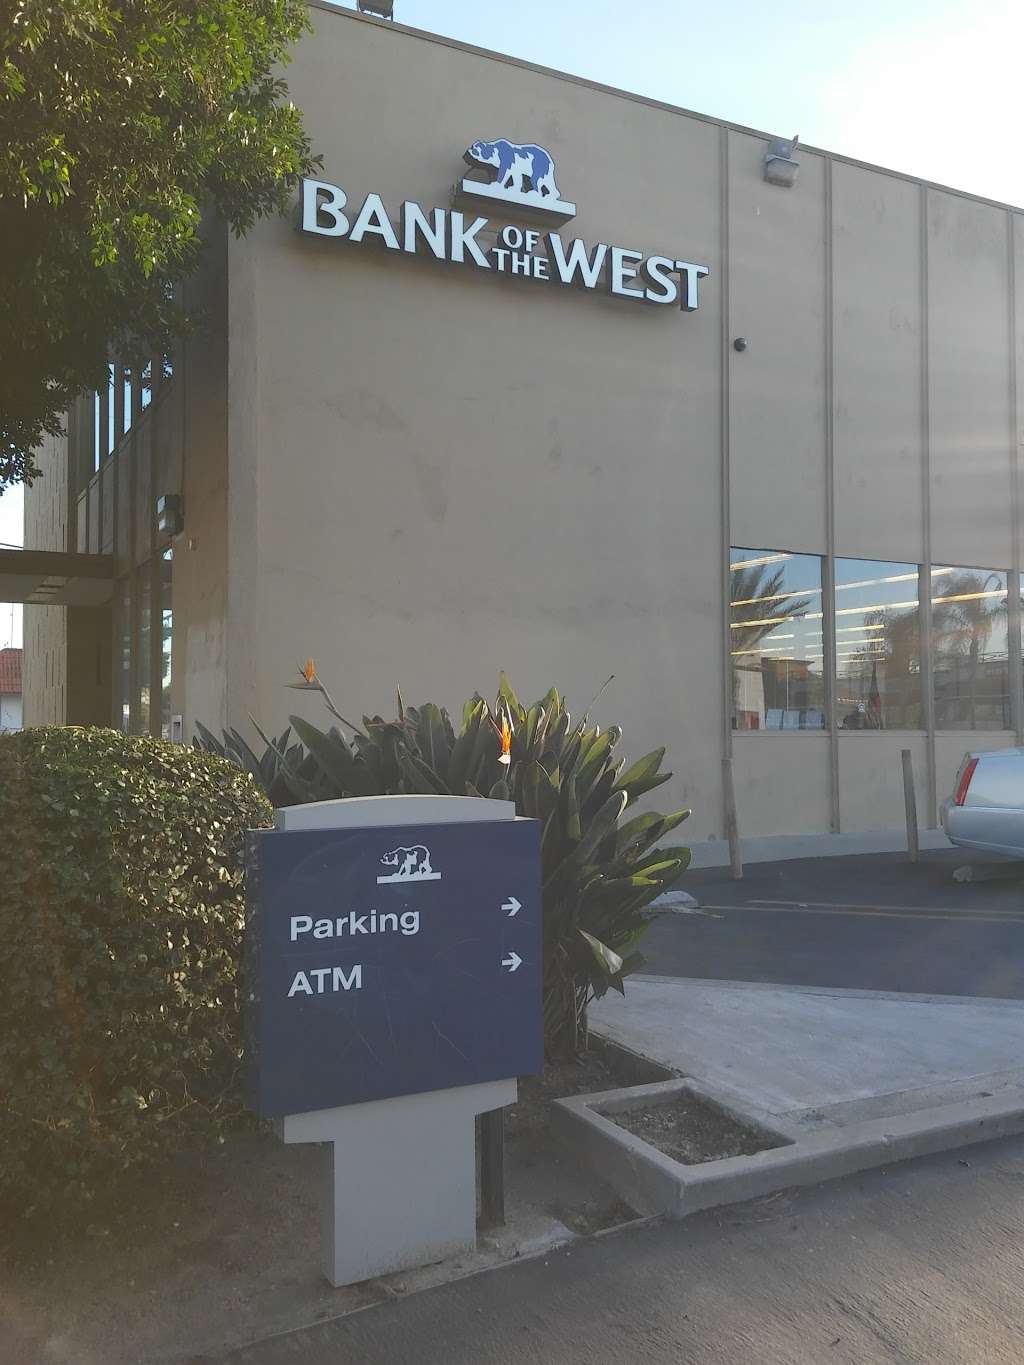 Bank of the West | 1701 N Long Beach Blvd, Compton, CA 90221 | Phone: (310) 639-1150